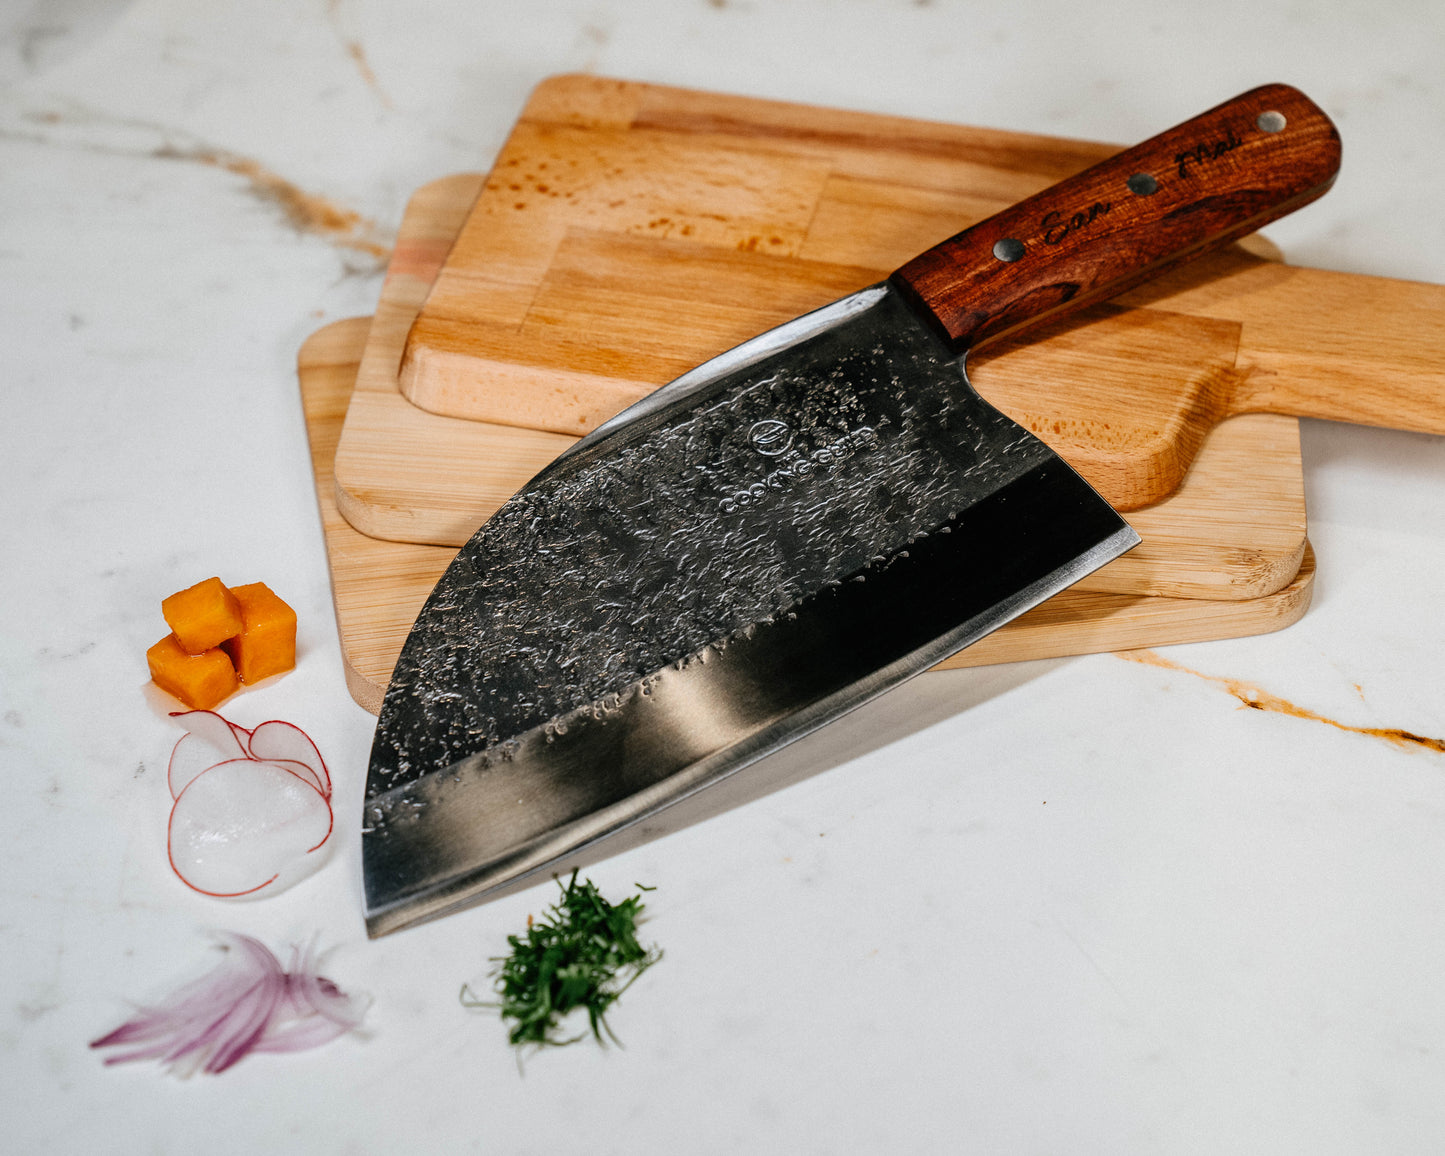 Limited Edition San Mai Rustic Cleaver